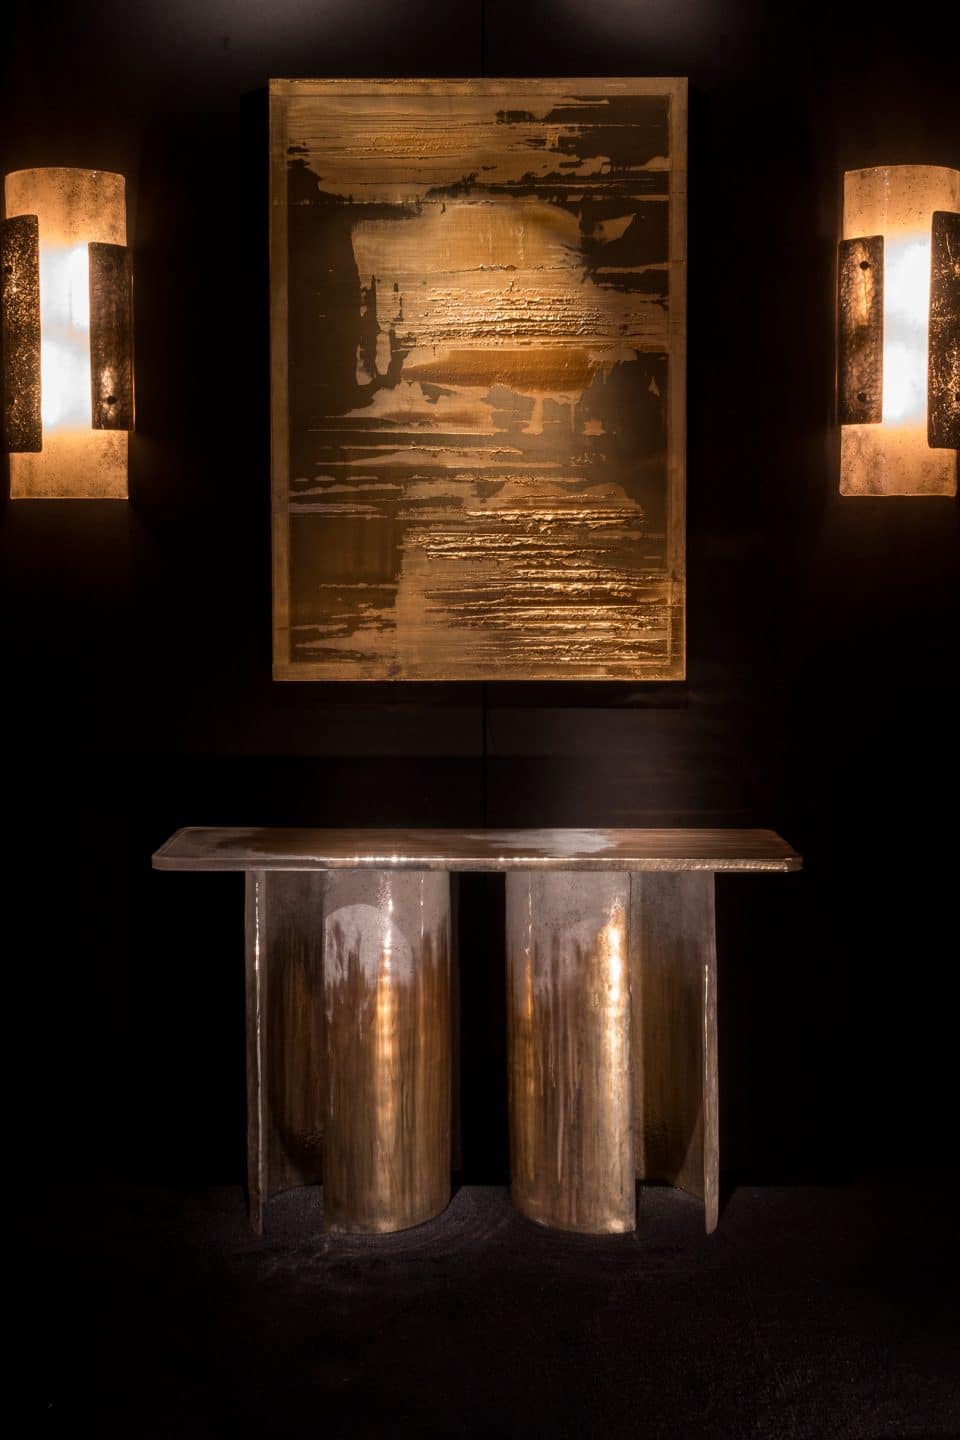 London Contemporary Design Connoisseur Charles Burnand Collaborates with Top Designers on Their Dream Creations